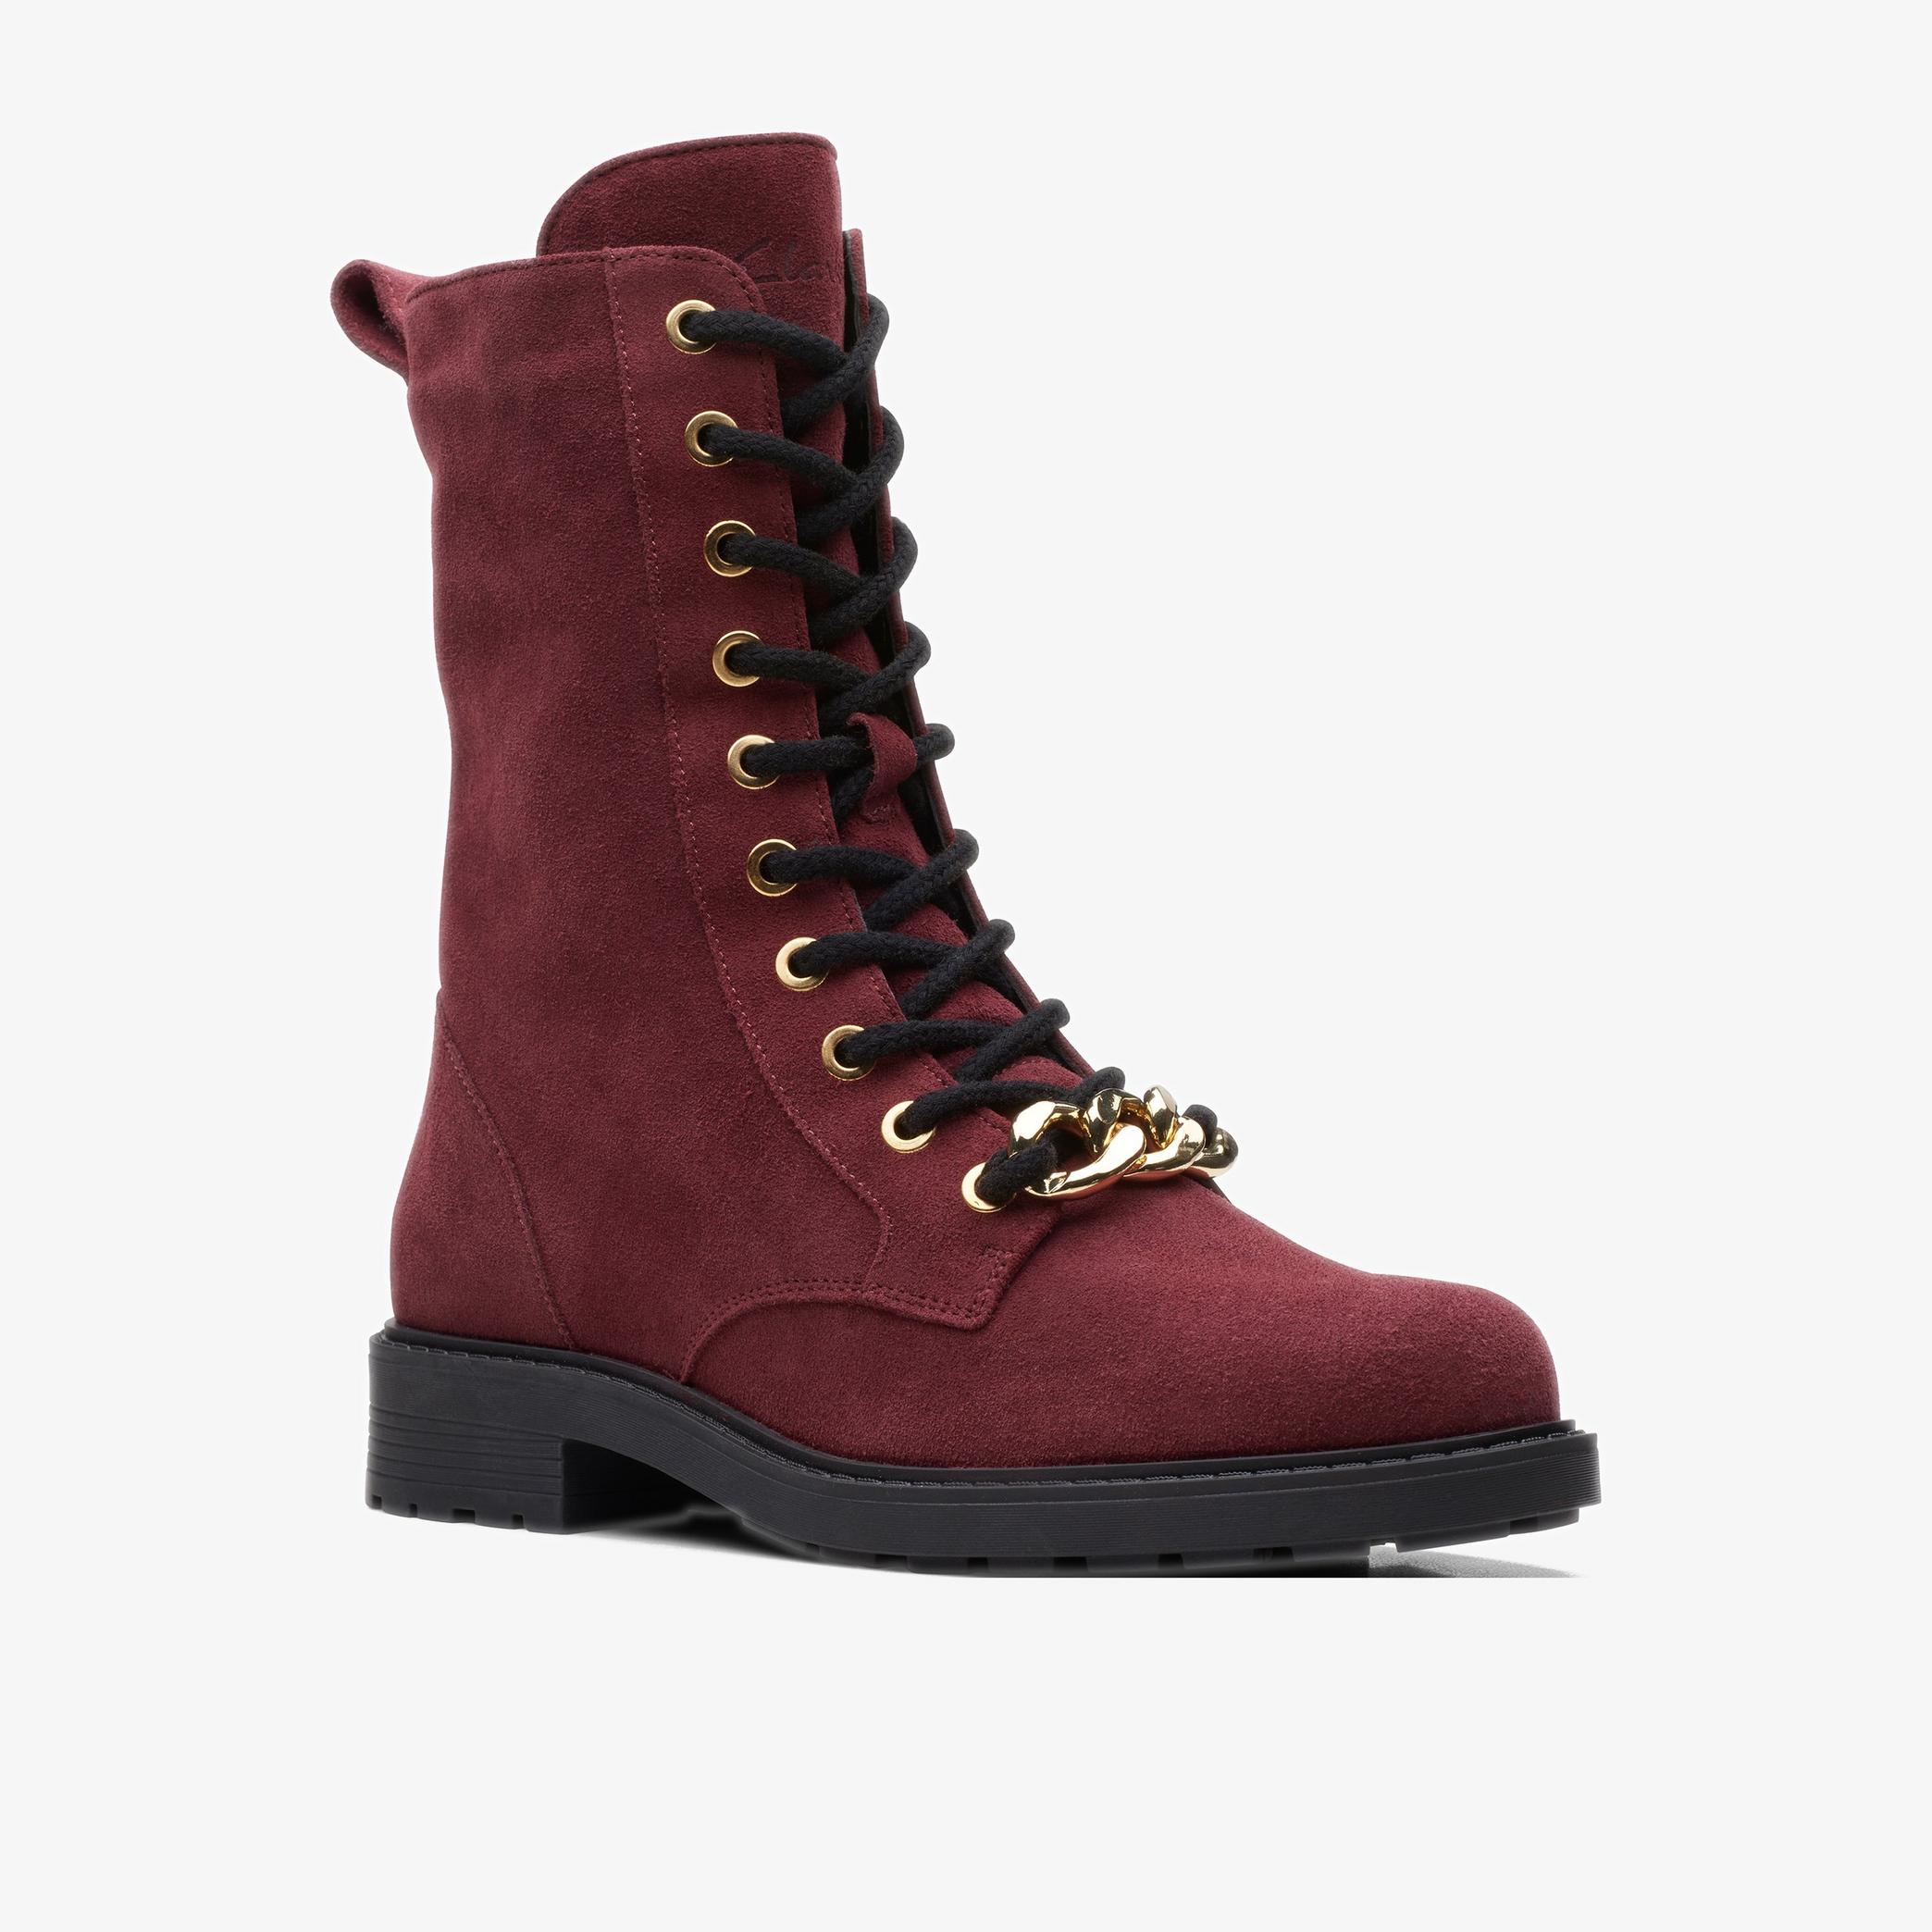 Orinoco2 Style Merlot Suede Ankle Boots, view 3 of 6